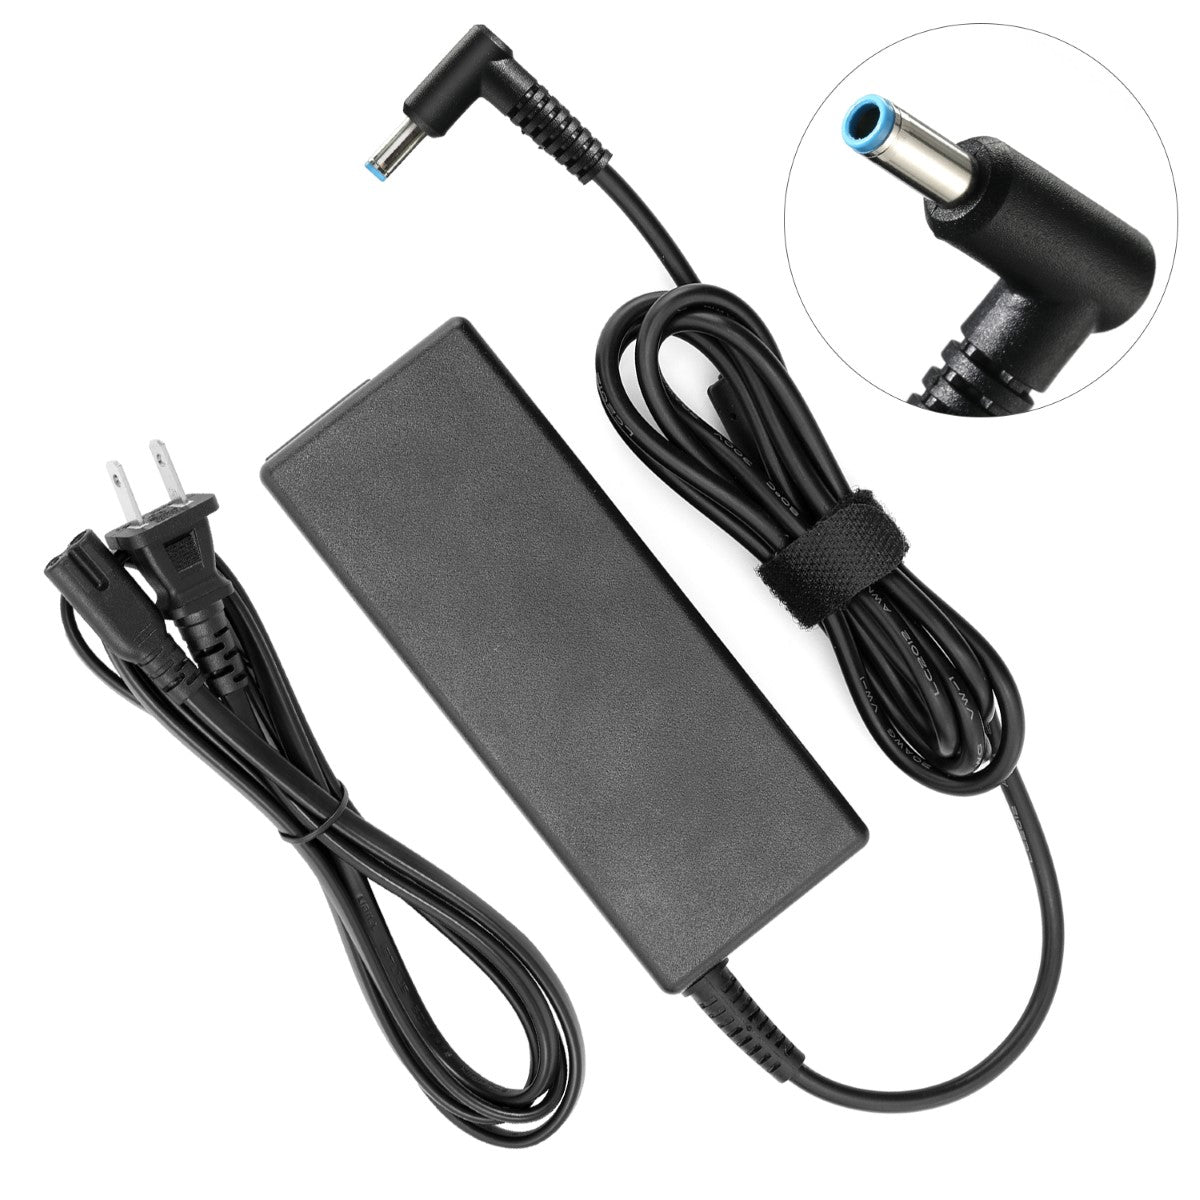 AC Adapter Charger for HP Chromebook 14-ak050nr Notebook.